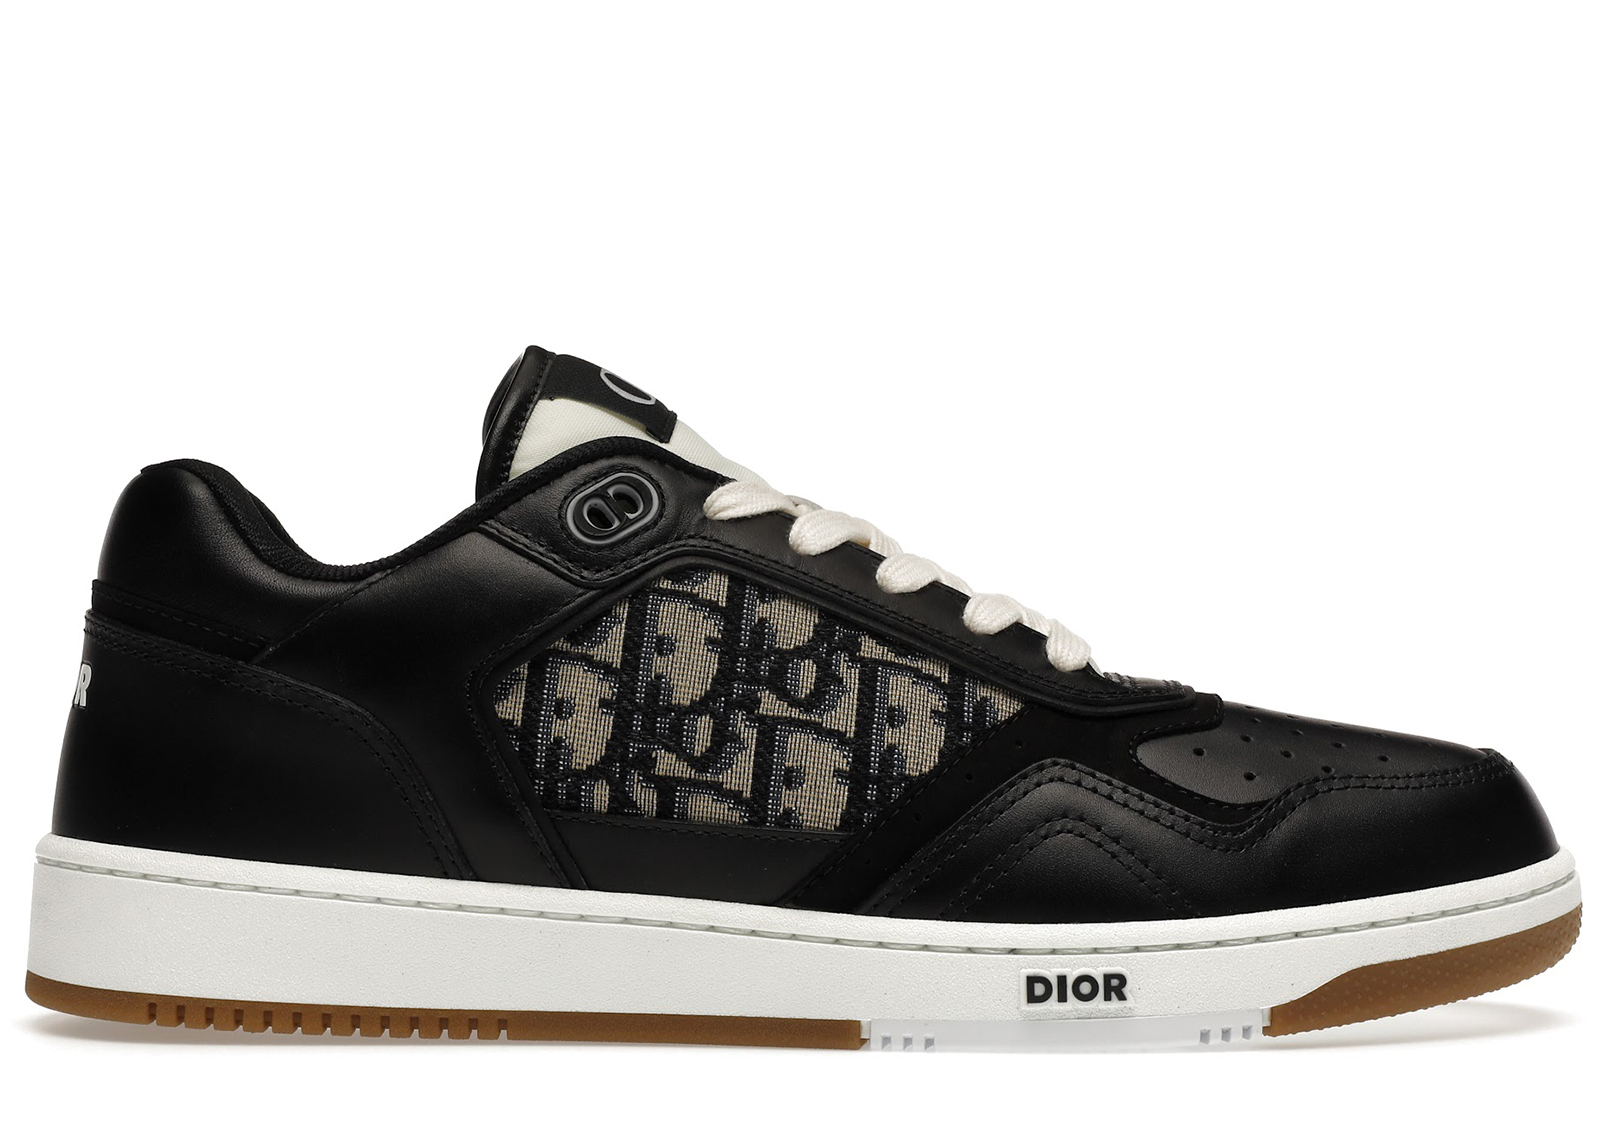 Dior B27 LowTop Sneaker  LBOAUS